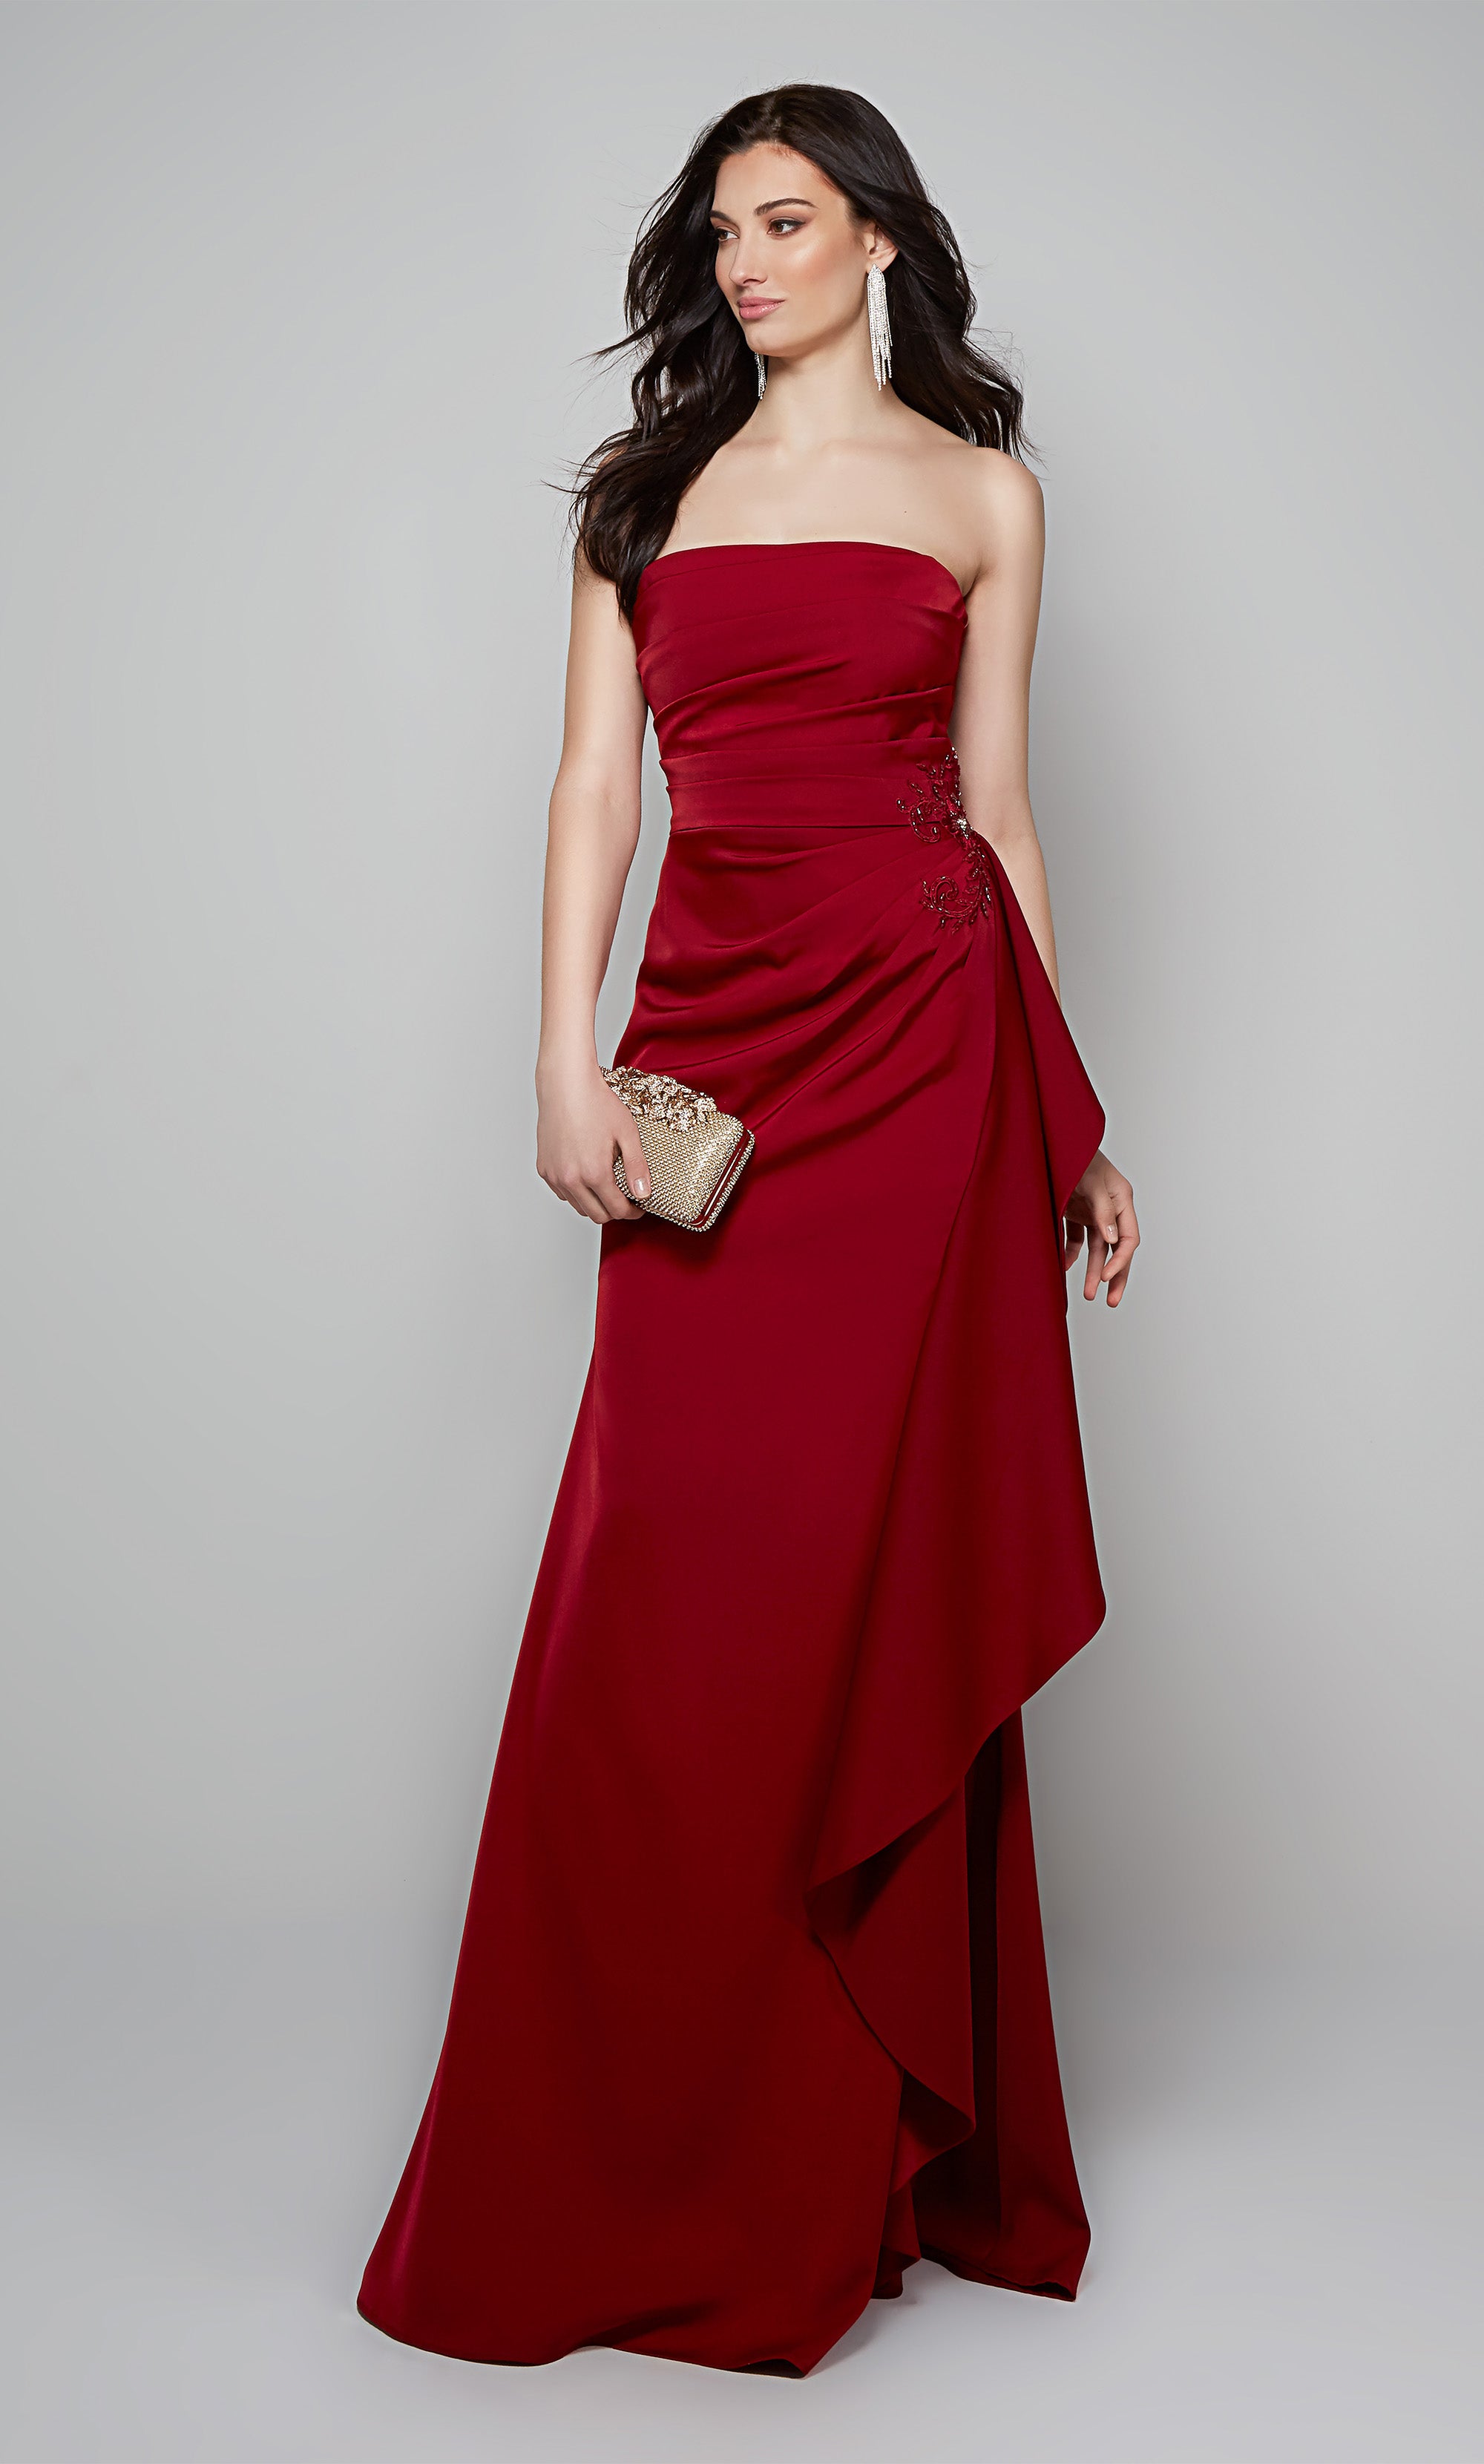 Formal Dress: 27569. Long, Strapless, Straight, Closed Back | Alyce Paris